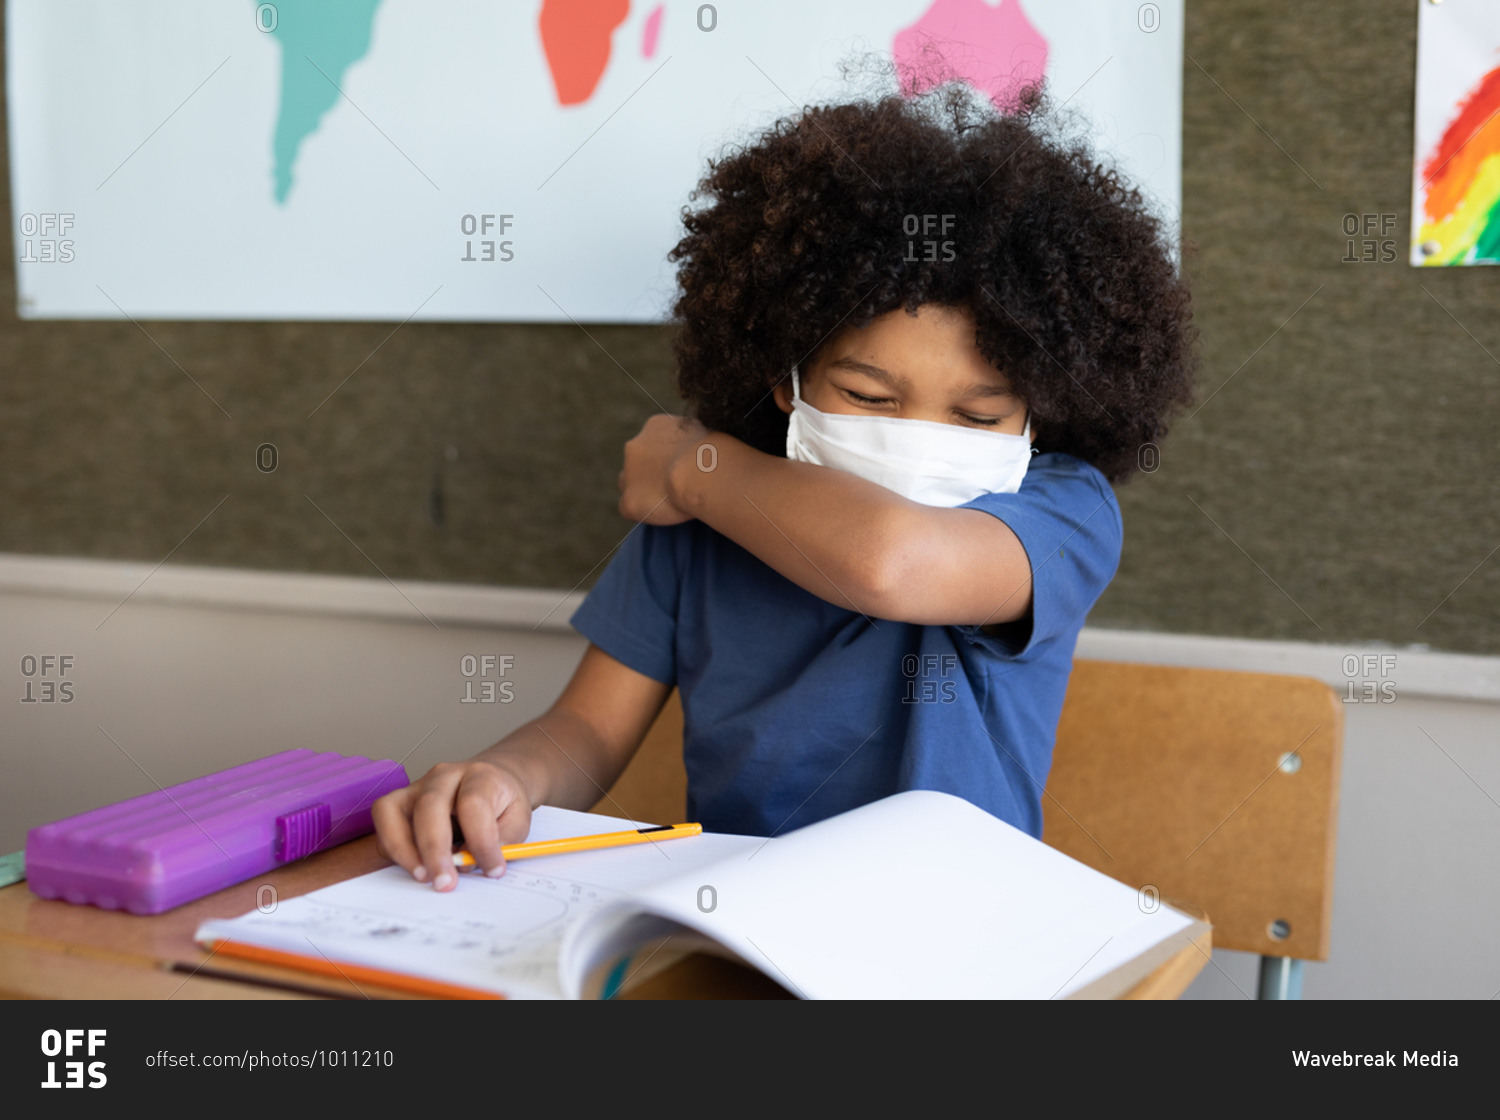 Mixed race boy sitting at desk wearing face mask in classroom, covering his face while sneezing. Primary education social distancing health safety during Covid19 Coronavirus pandemic.